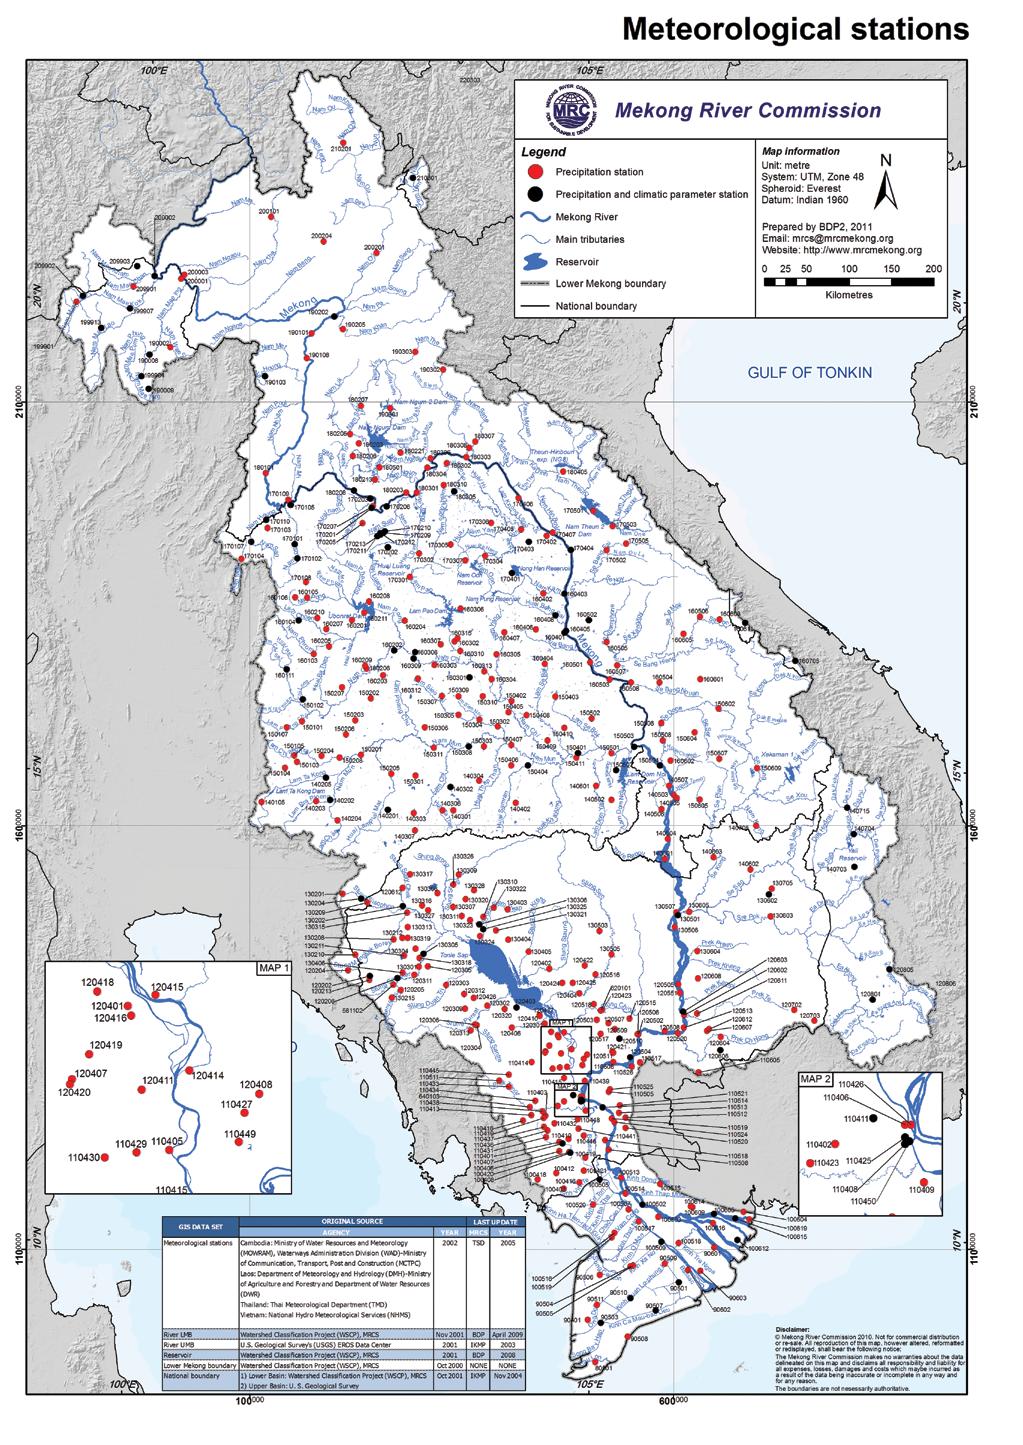 Mekong River Commission 94 Planning Atlas of